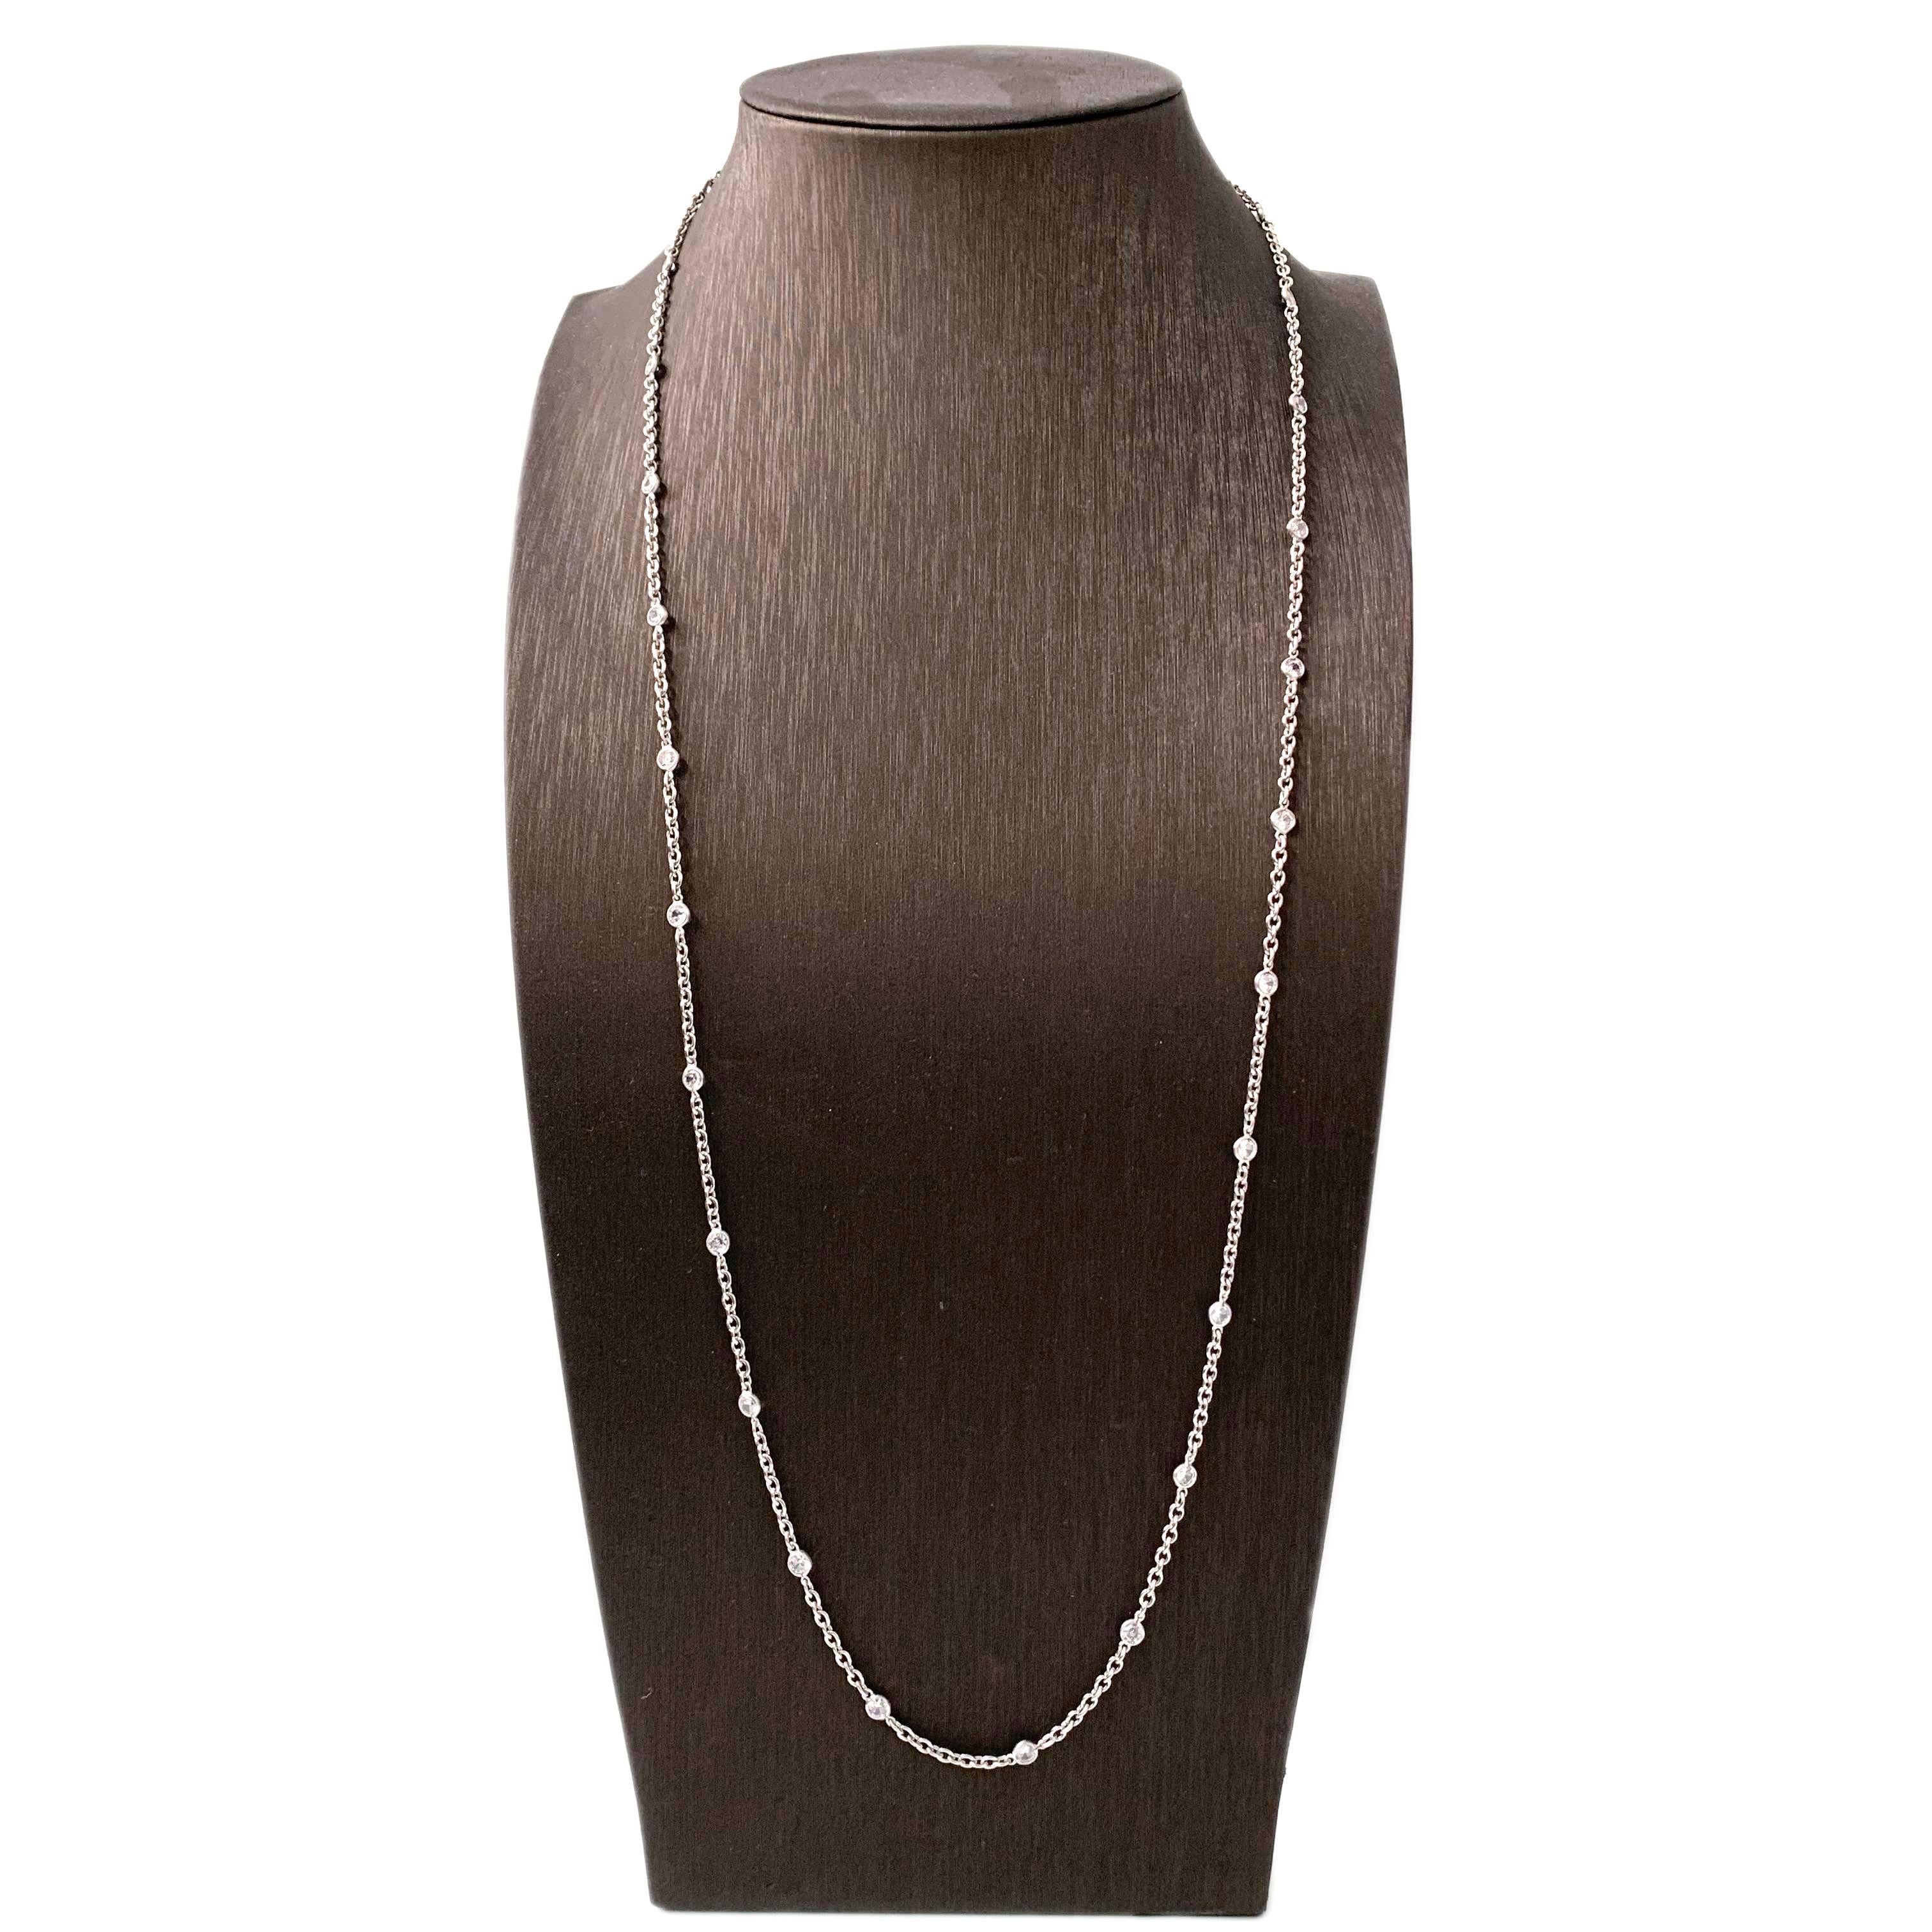 Simulated Diamond by the Yard Sterling Silver Long Necklace

A long and elegant platinum tone chain is embellished with hand bezel-set faceted simulated diamond cz (0.25ct size each - 6.25ct size total) every 1